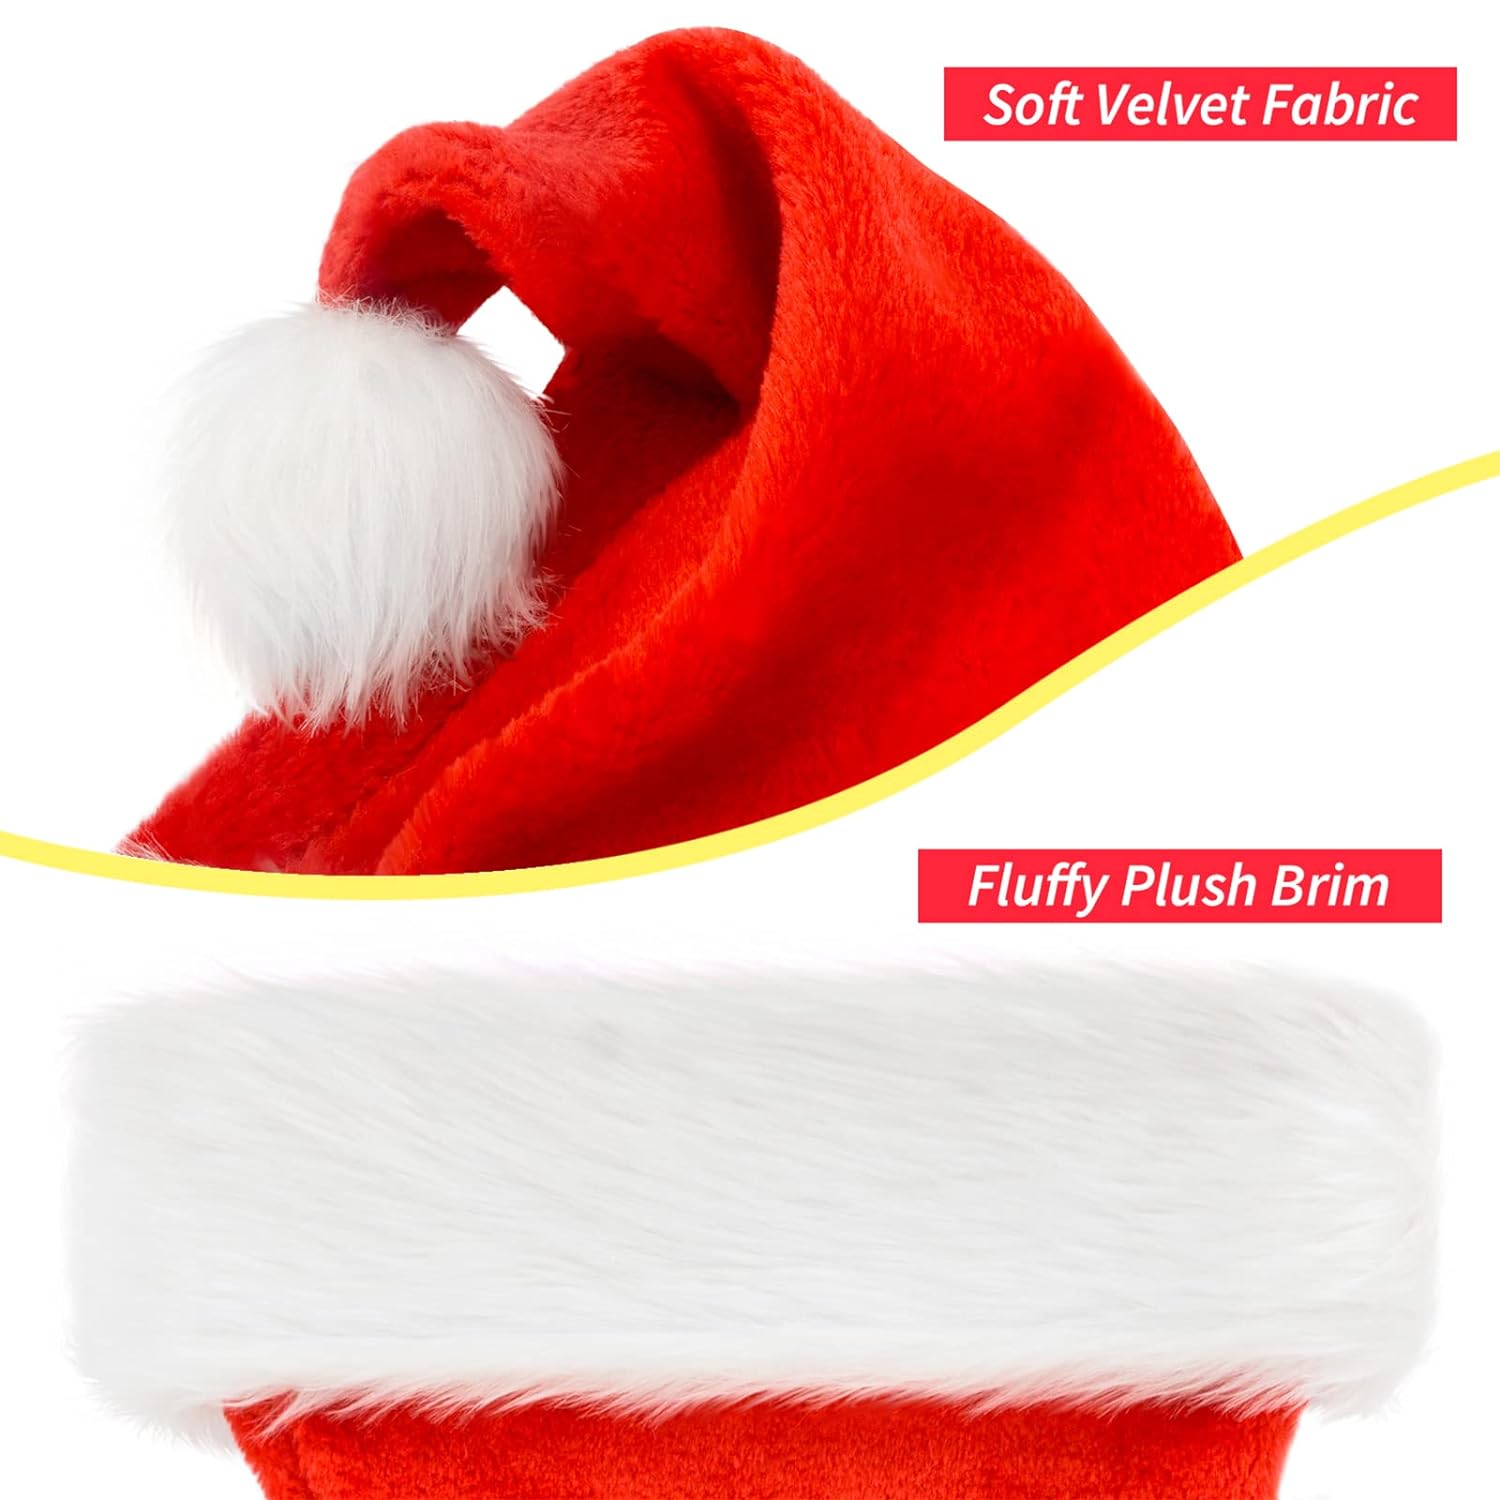 eCraftIndia Red and White Velvet Classic Fur Merry Christmas Hats, Santa Claus Caps for kids and Adults - XMAS Caps, Santa Hats for Christmas, New Year, Festive Holiday Party Celebration (Set of 18) 6